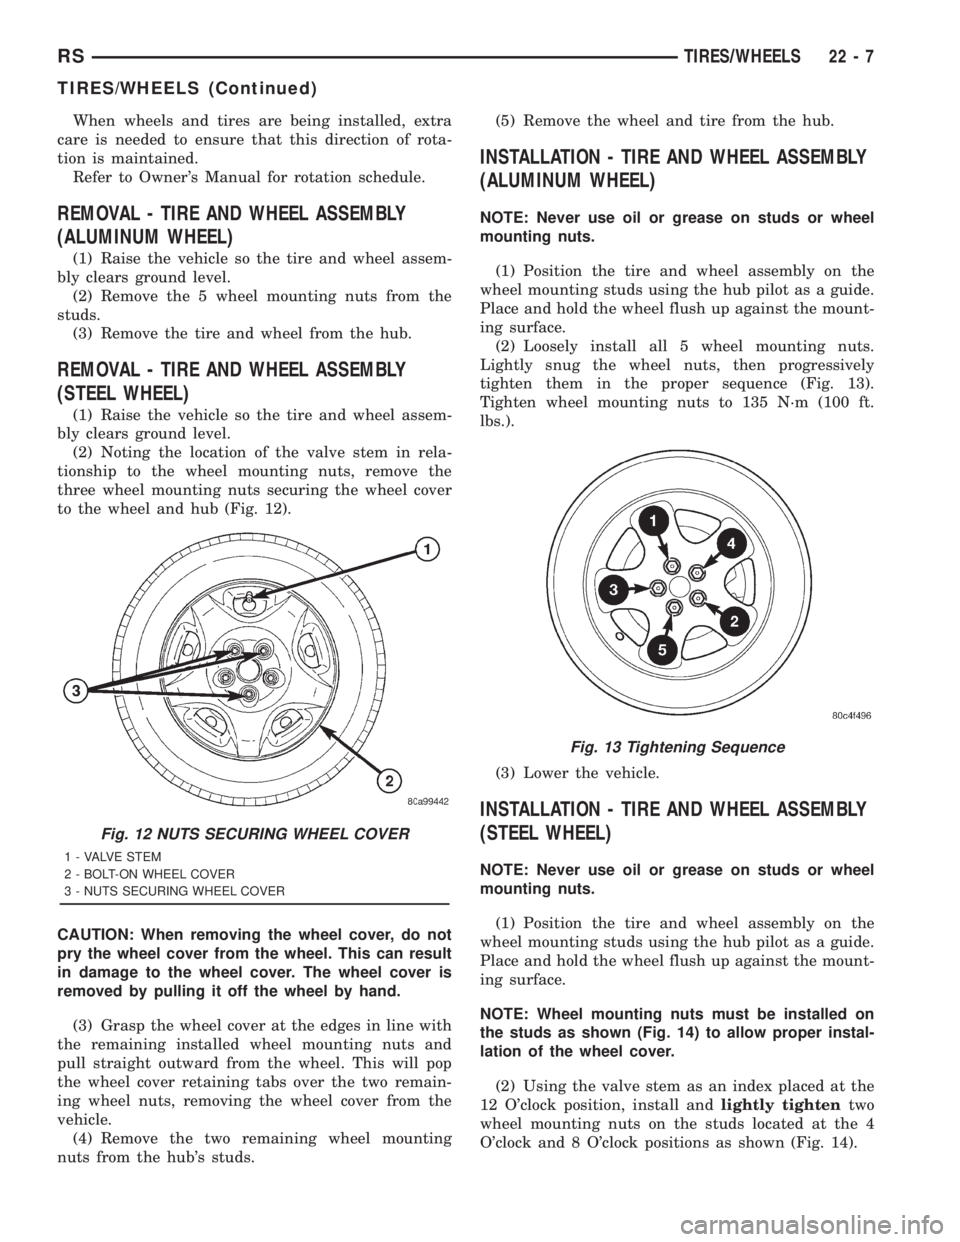 CHRYSLER VOYAGER 2001  Service Manual When wheels and tires are being installed, extra
care is needed to ensure that this direction of rota-
tion is maintained.
Refer to Owners Manual for rotation schedule.
REMOVAL - TIRE AND WHEEL ASSEM